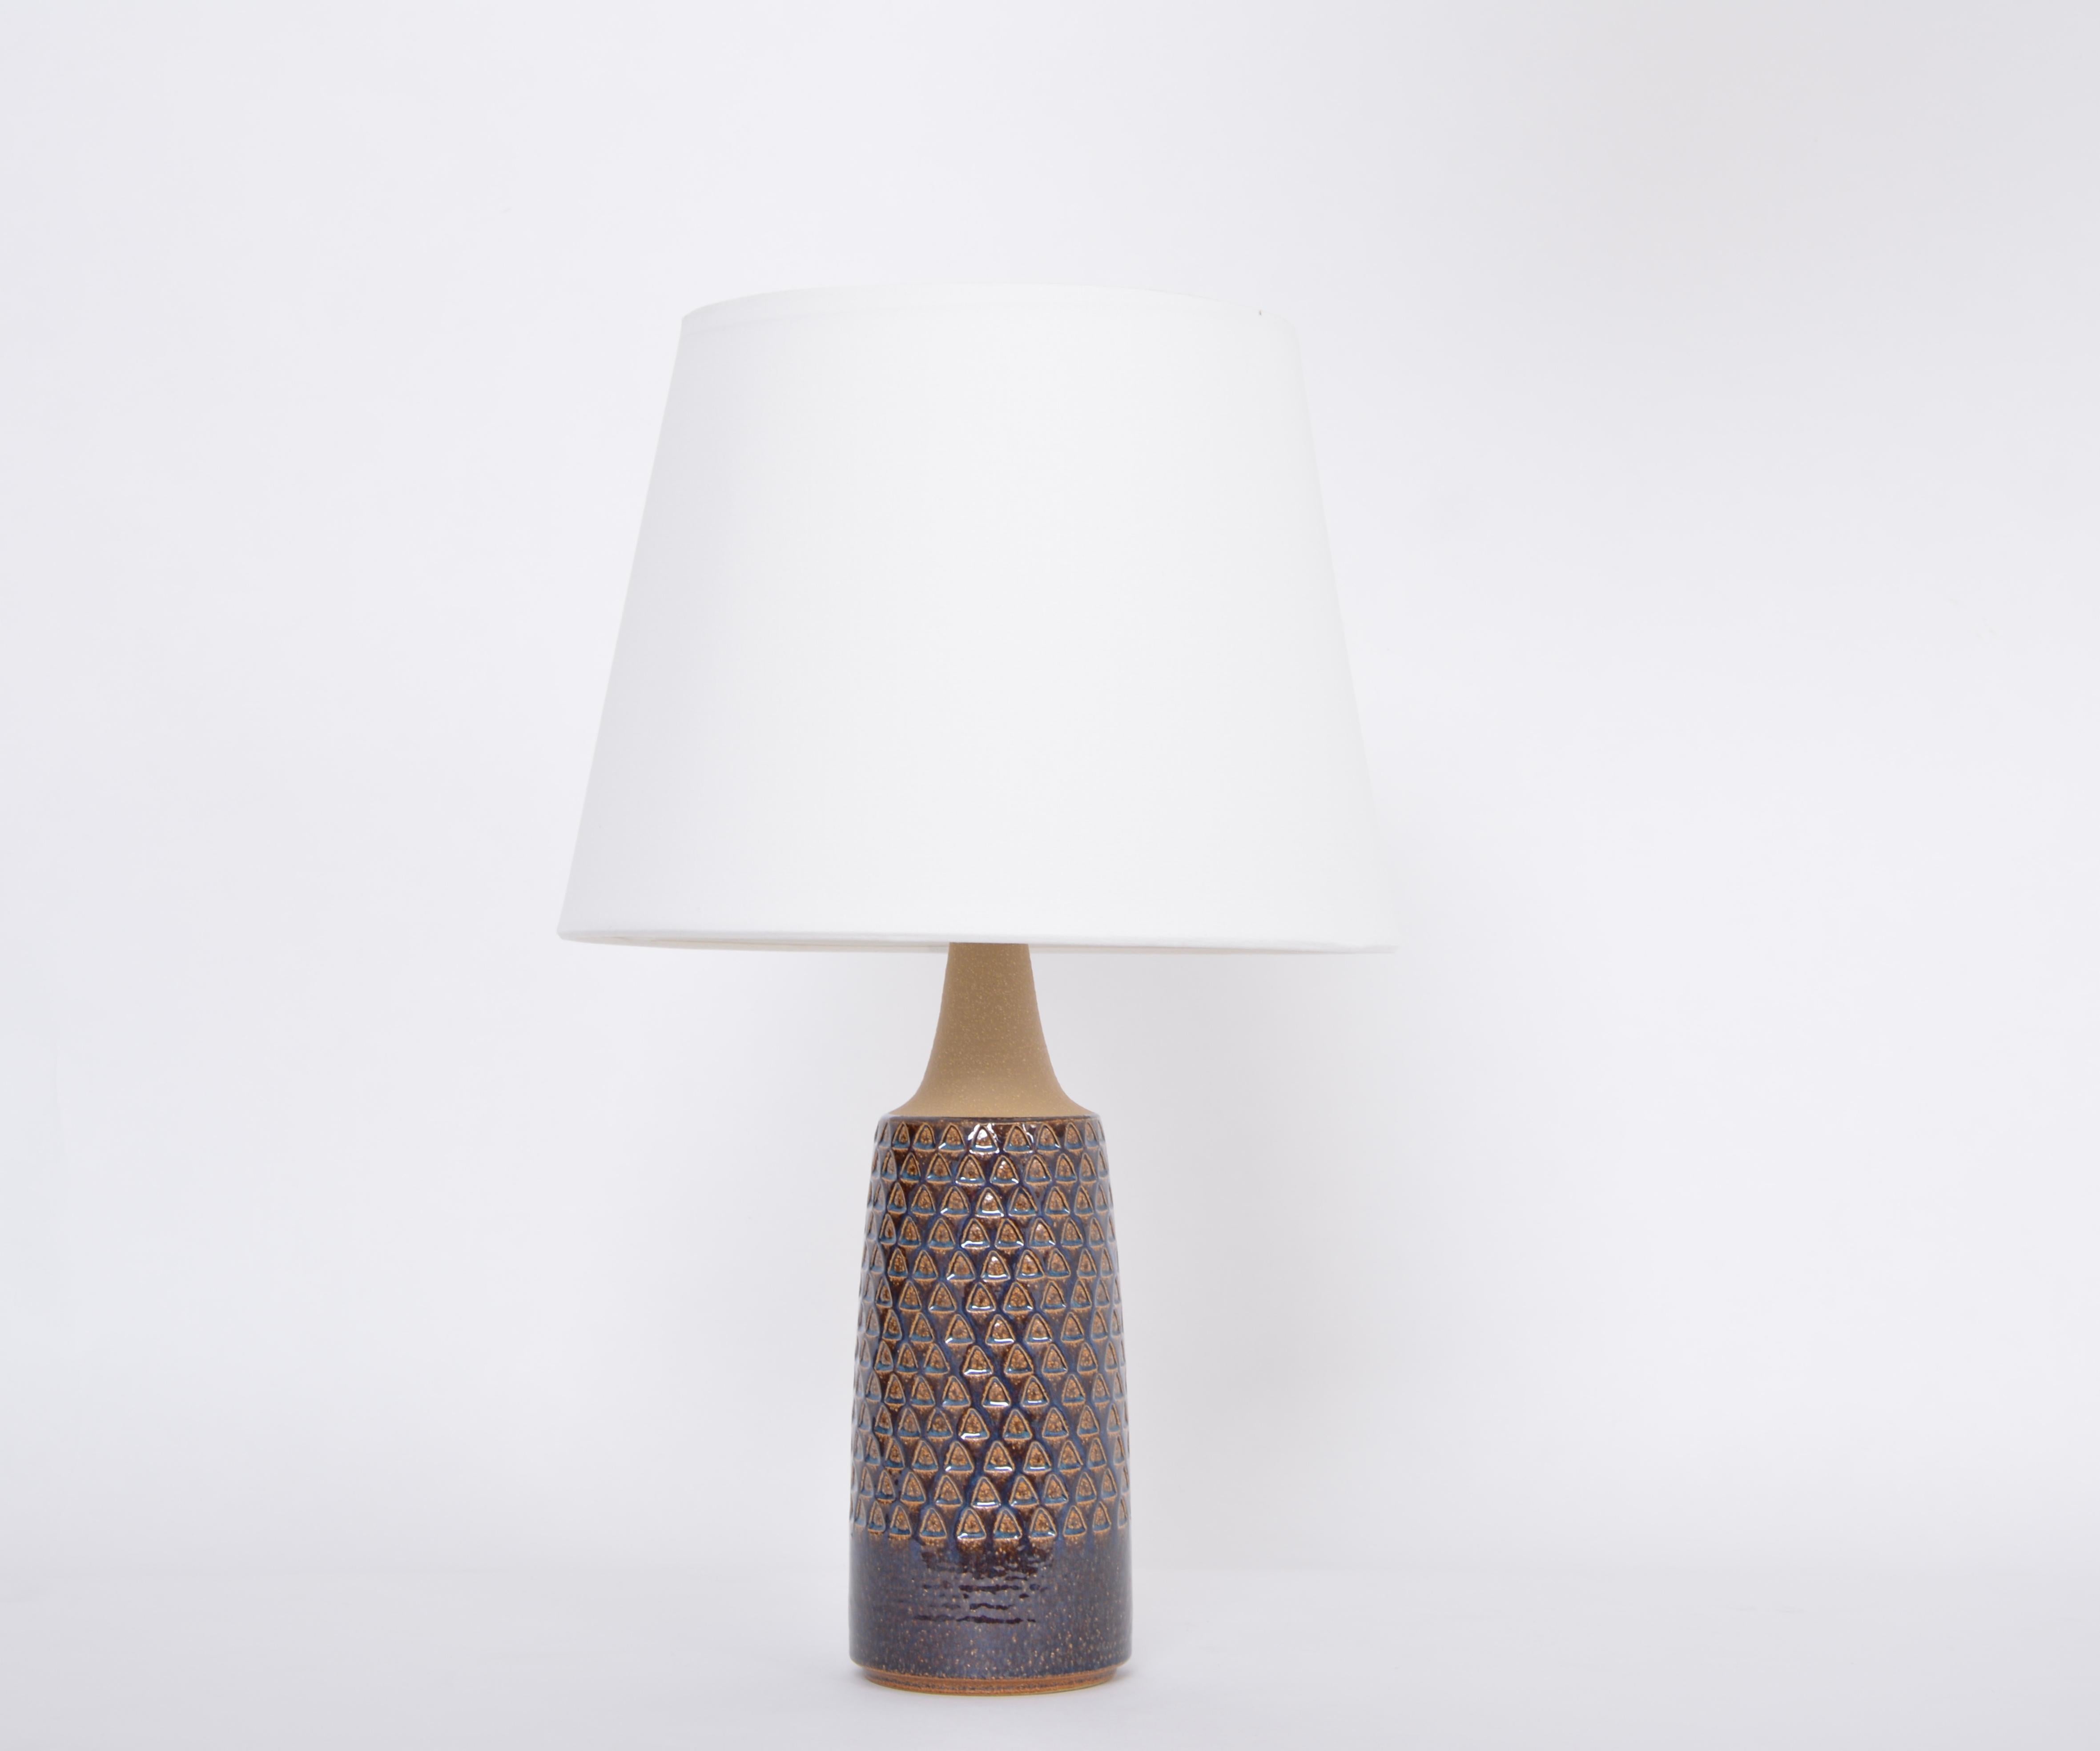 Tall Handmade Danish Mid-Century Modern Ceramic table lamp by Soholm
This table lamp was produced by Soholm Stentoj in Denmark in the 1960s. Gorgeous glazing in different colors ranging from brown to dark blue. The base features a graphic relief